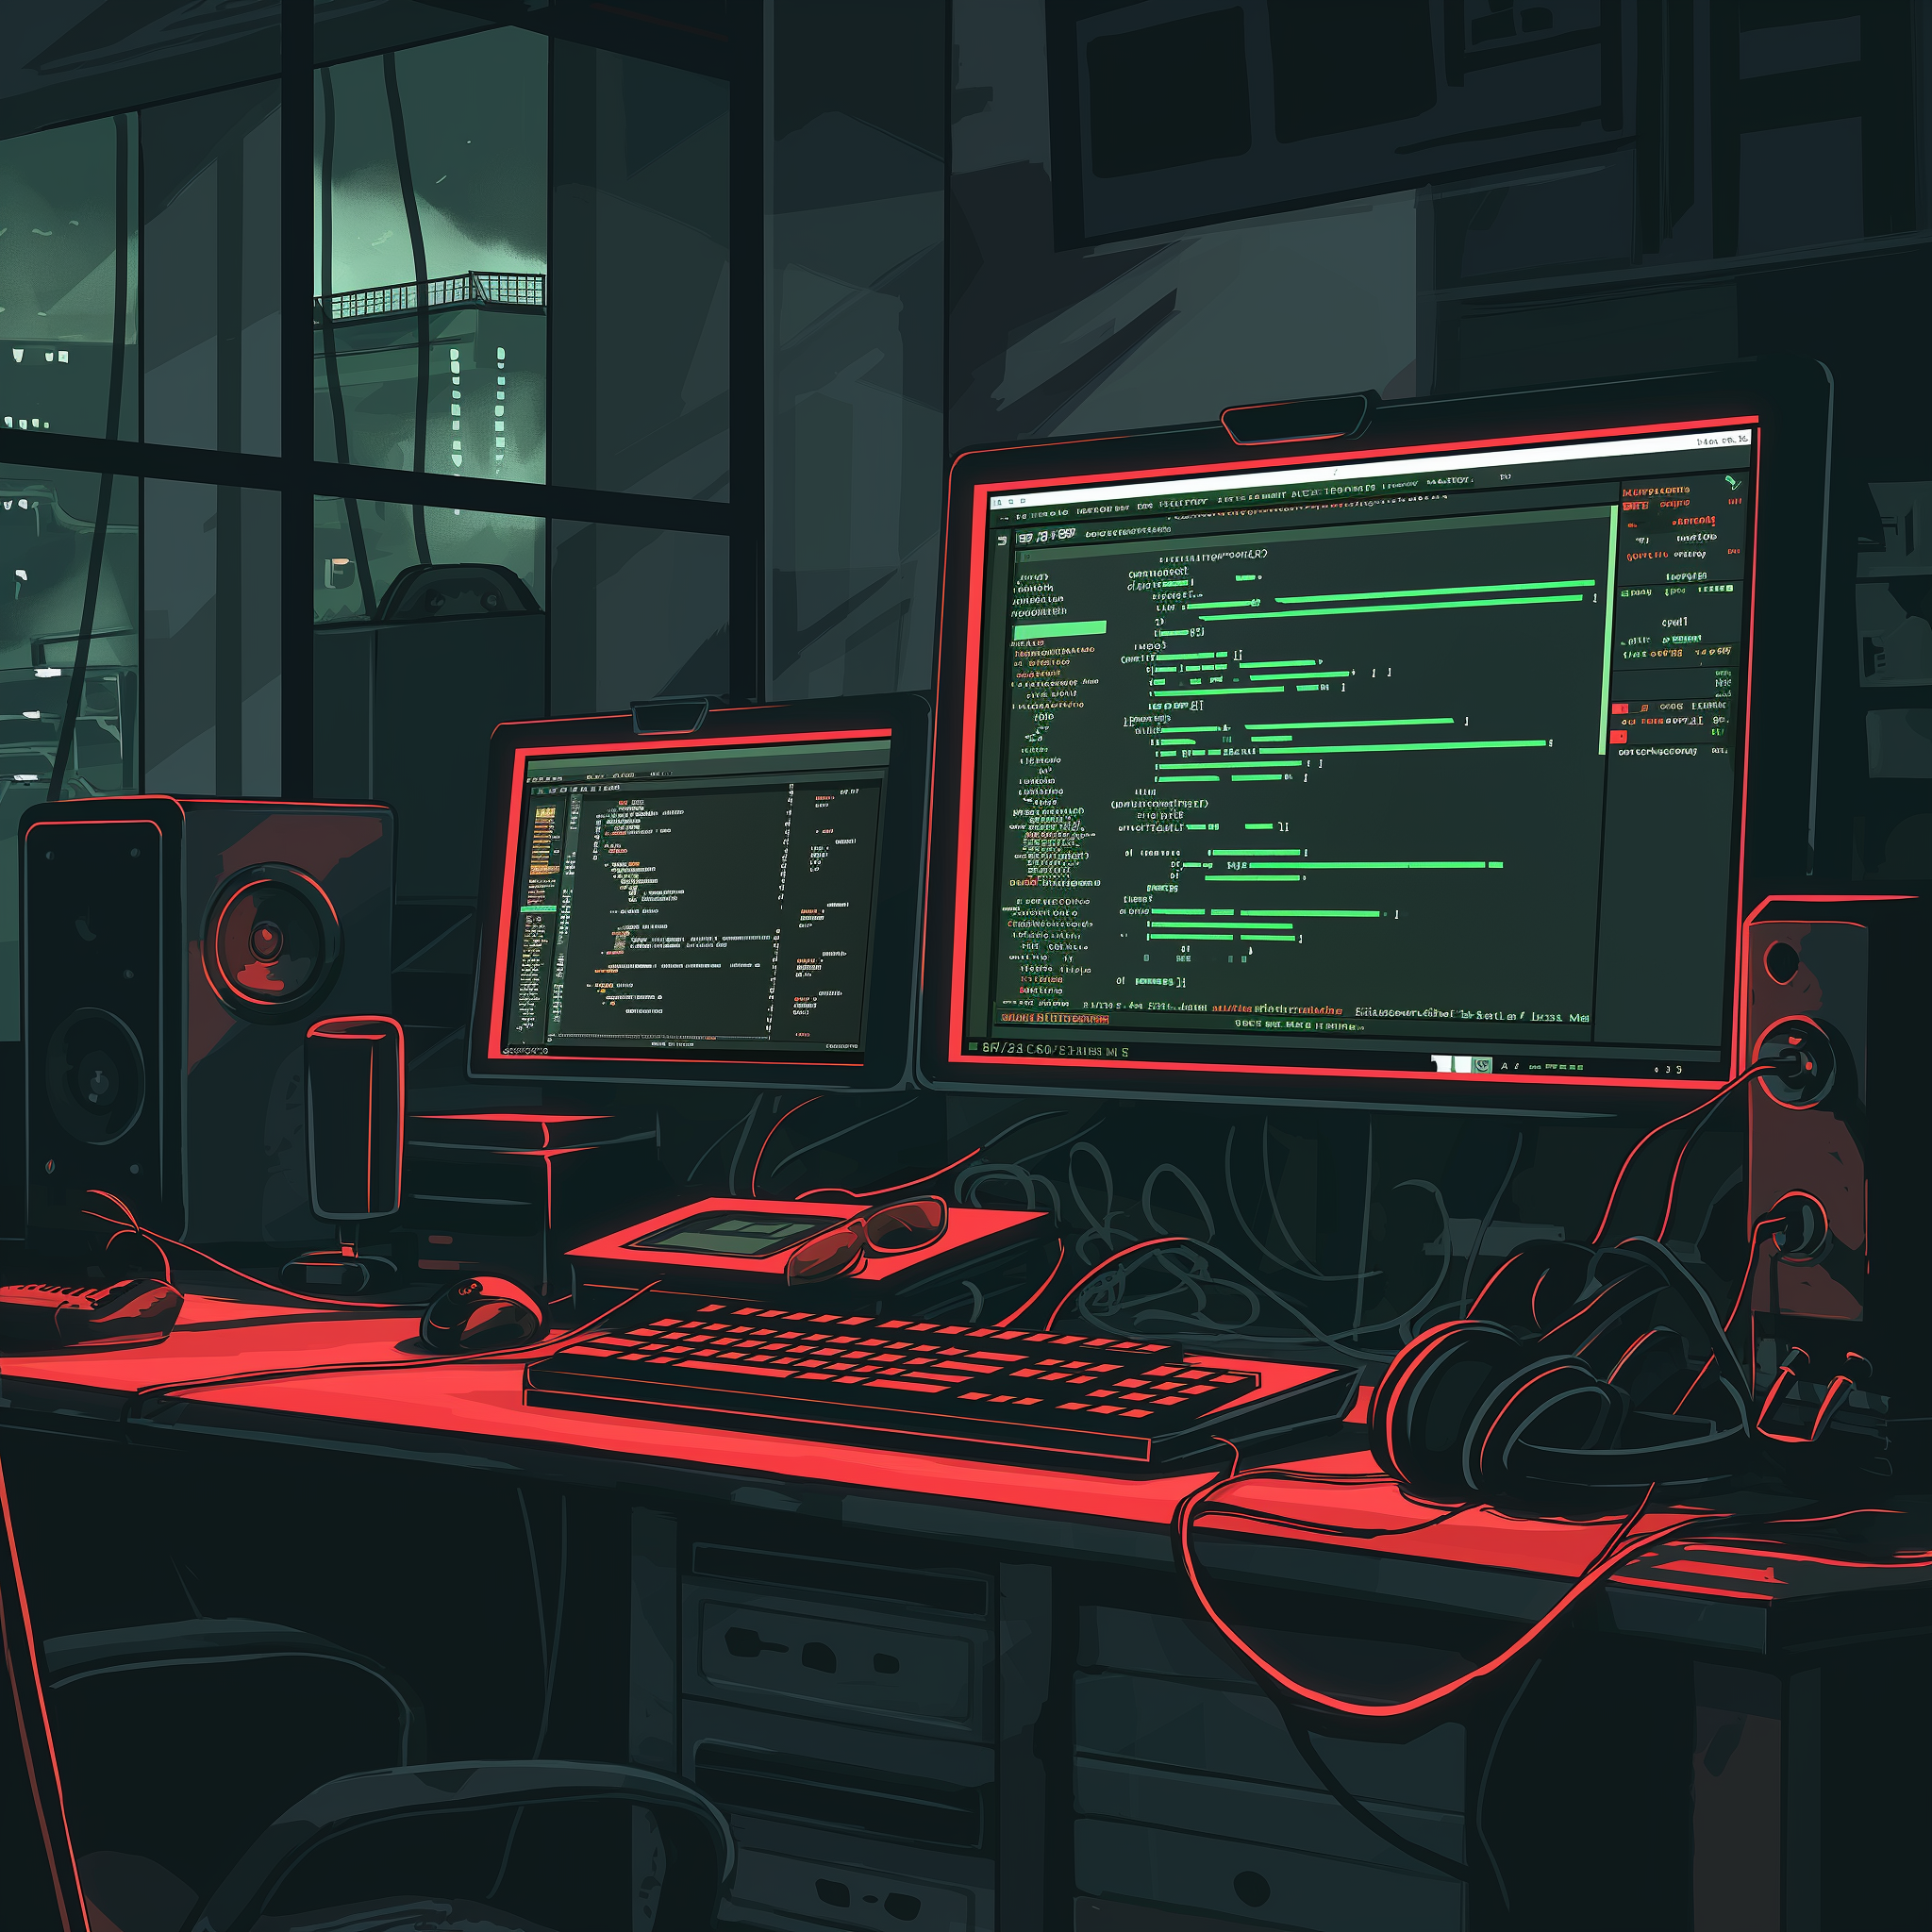 Illustration of a programming workspace at night with multiple screens displaying code, ideal for a developer's avatar or profile picture.